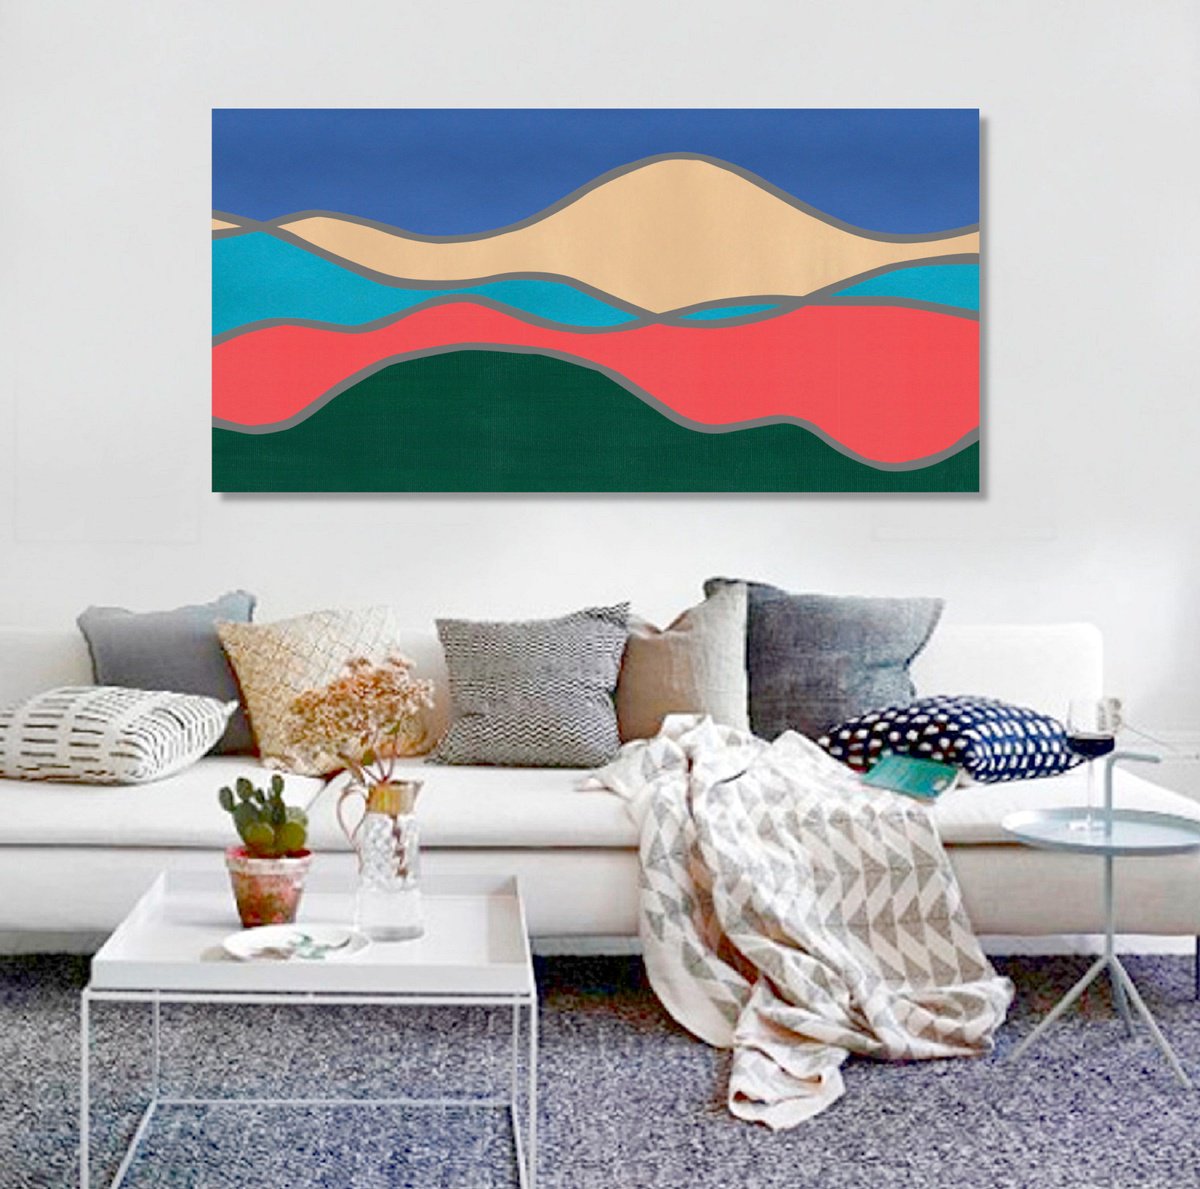 Modern Landscape #18 - Extra Large Painting - Shipping - Rolled in a Tube by Marina Krylova